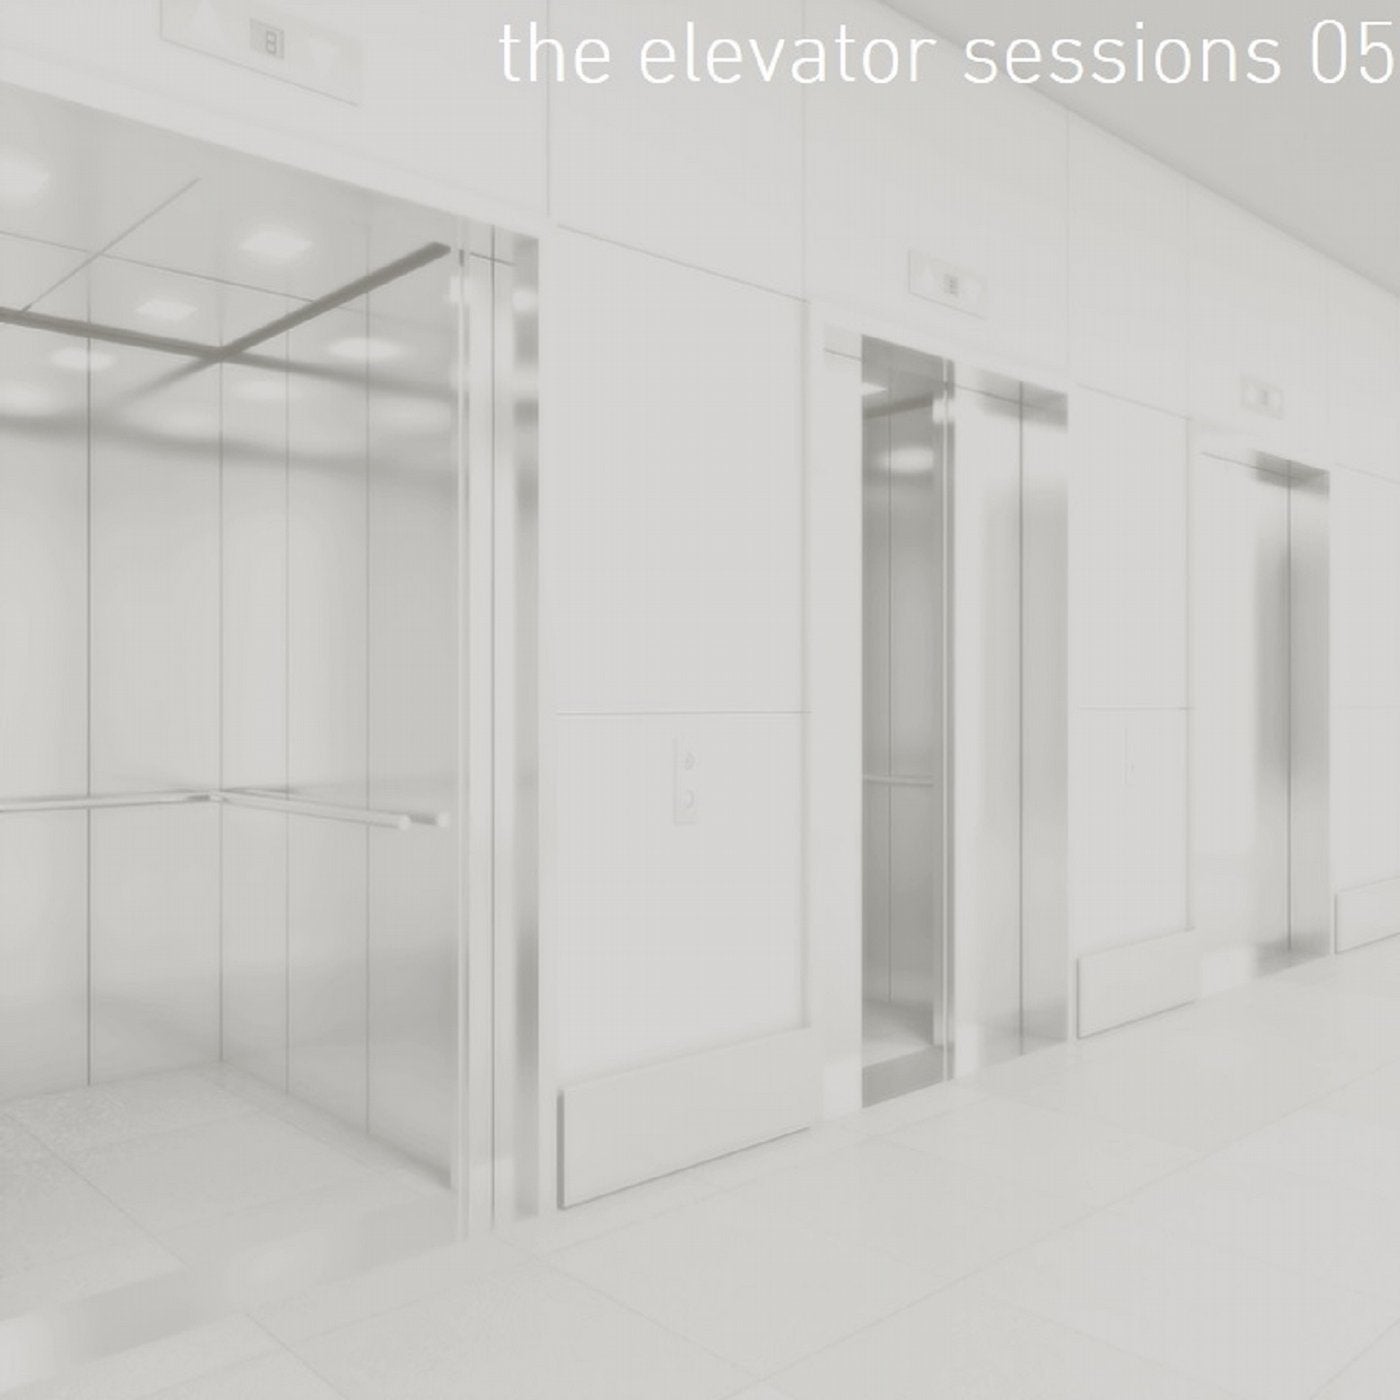 The Elevator Sessions 05 (Compiled & Mixed by Klangstein)